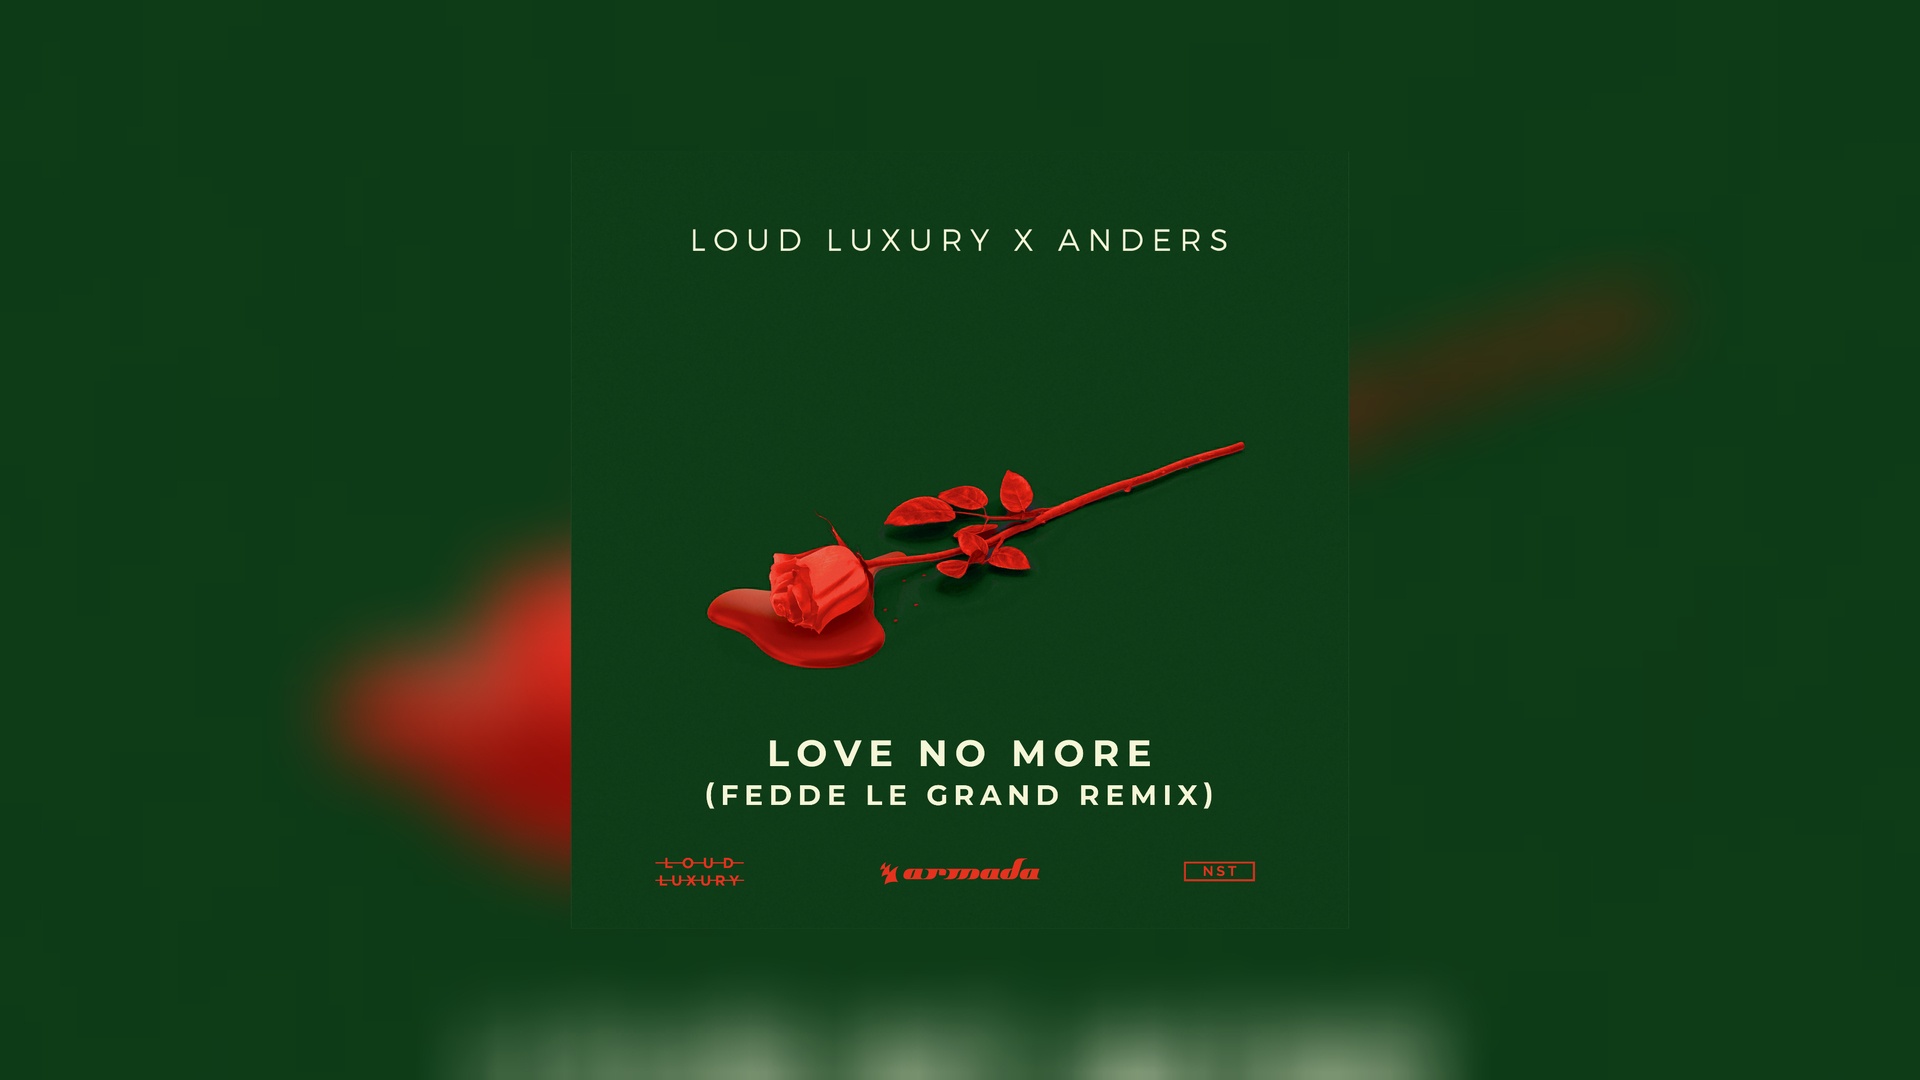 Loud Luxury x anders - Love No More (Fedde Le Grand remix)